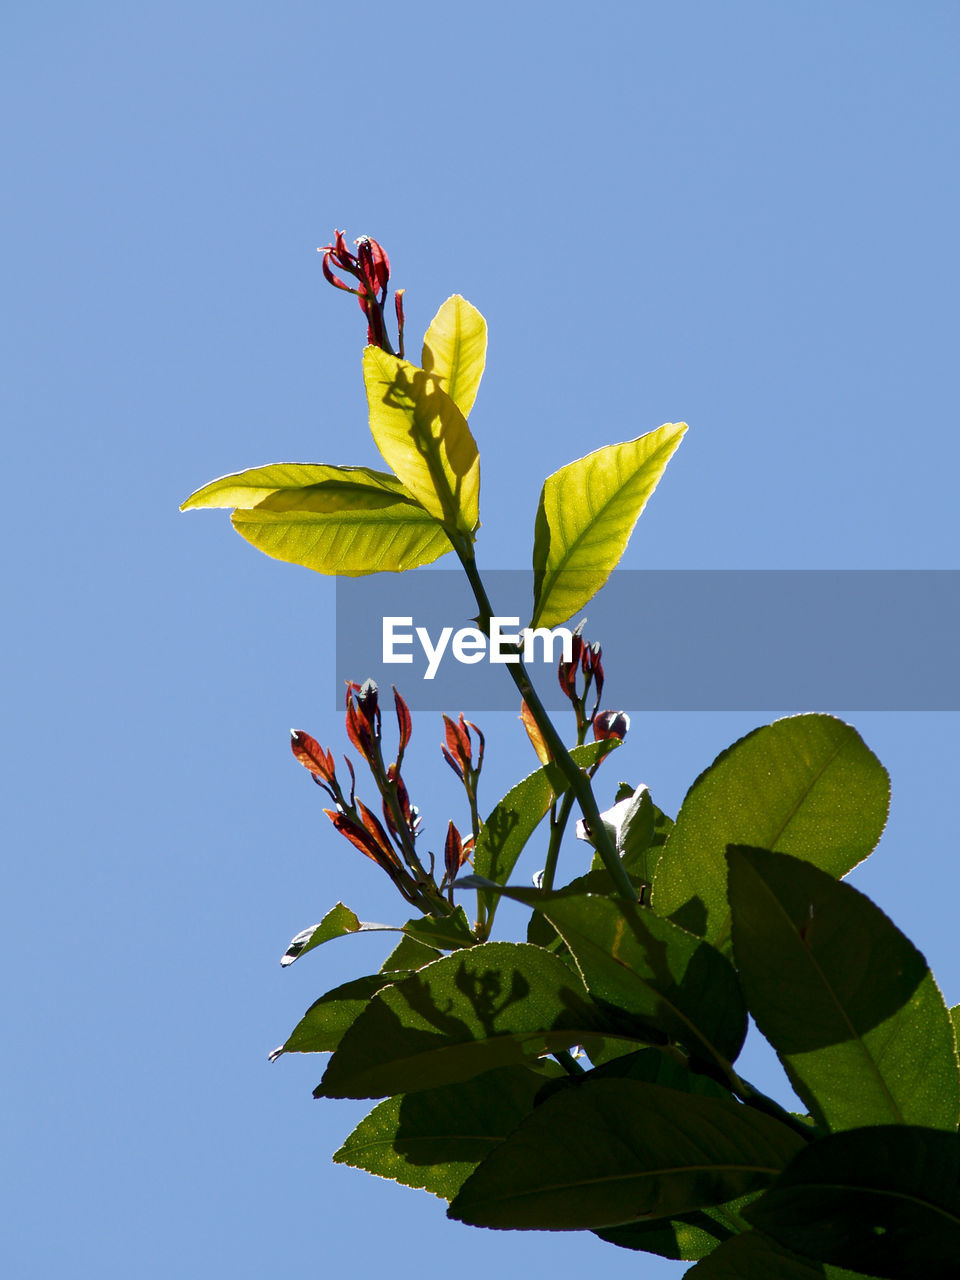 CLOSE-UP OF FLOWERING PLANT AGAINST BLUE SKY